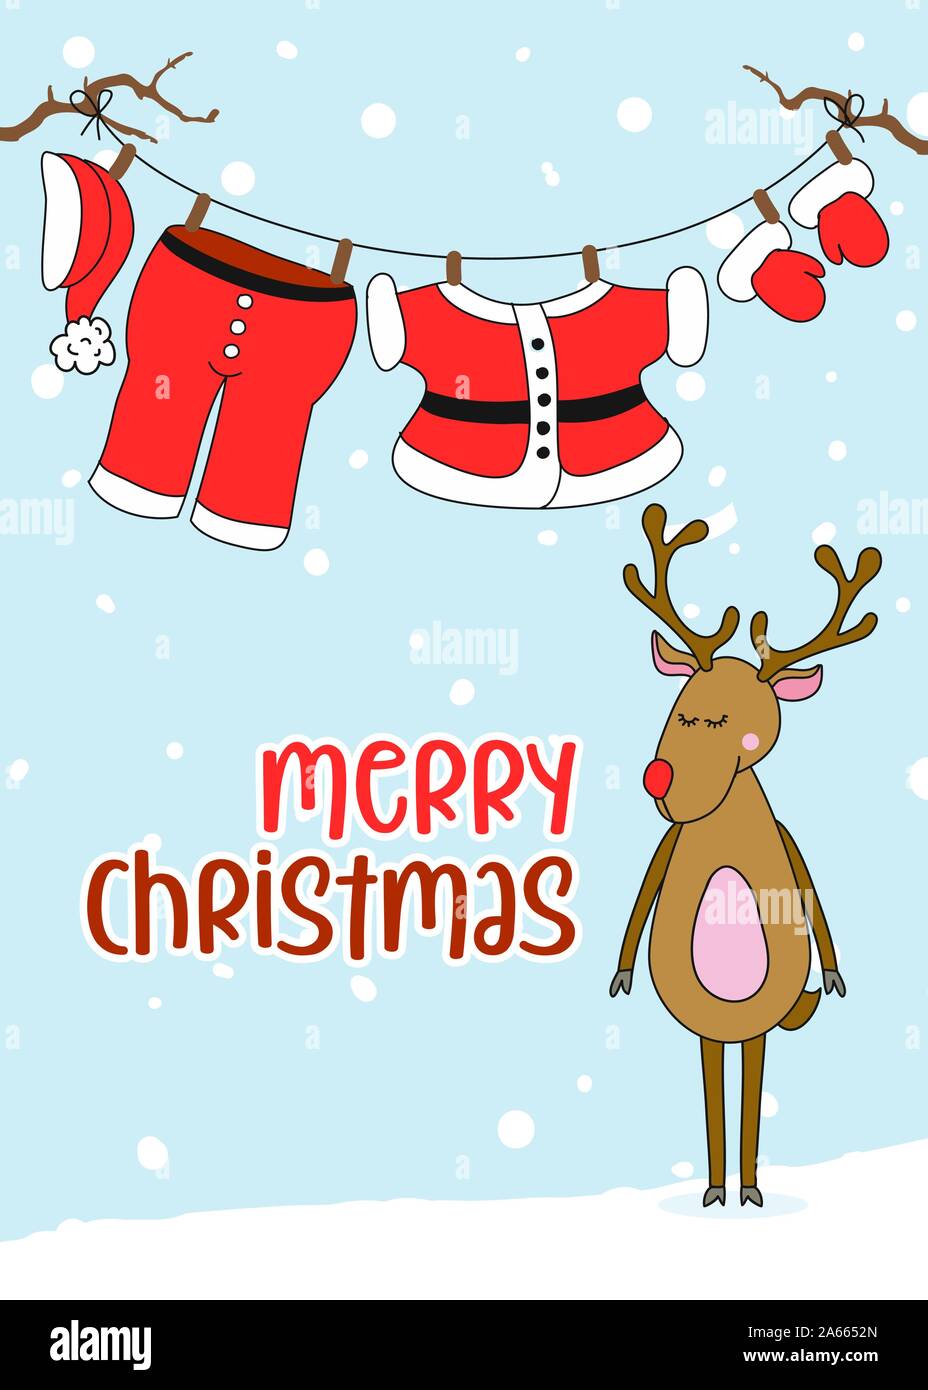 https://c8.alamy.com/comp/2A6652N/santa-clauss-hanging-clothes-with-merry-christmas-text-hand-drawn-lettering-for-xmas-greetings-cards-invitations-good-for-t-shirt-mug-scrap-book-2A6652N.jpg